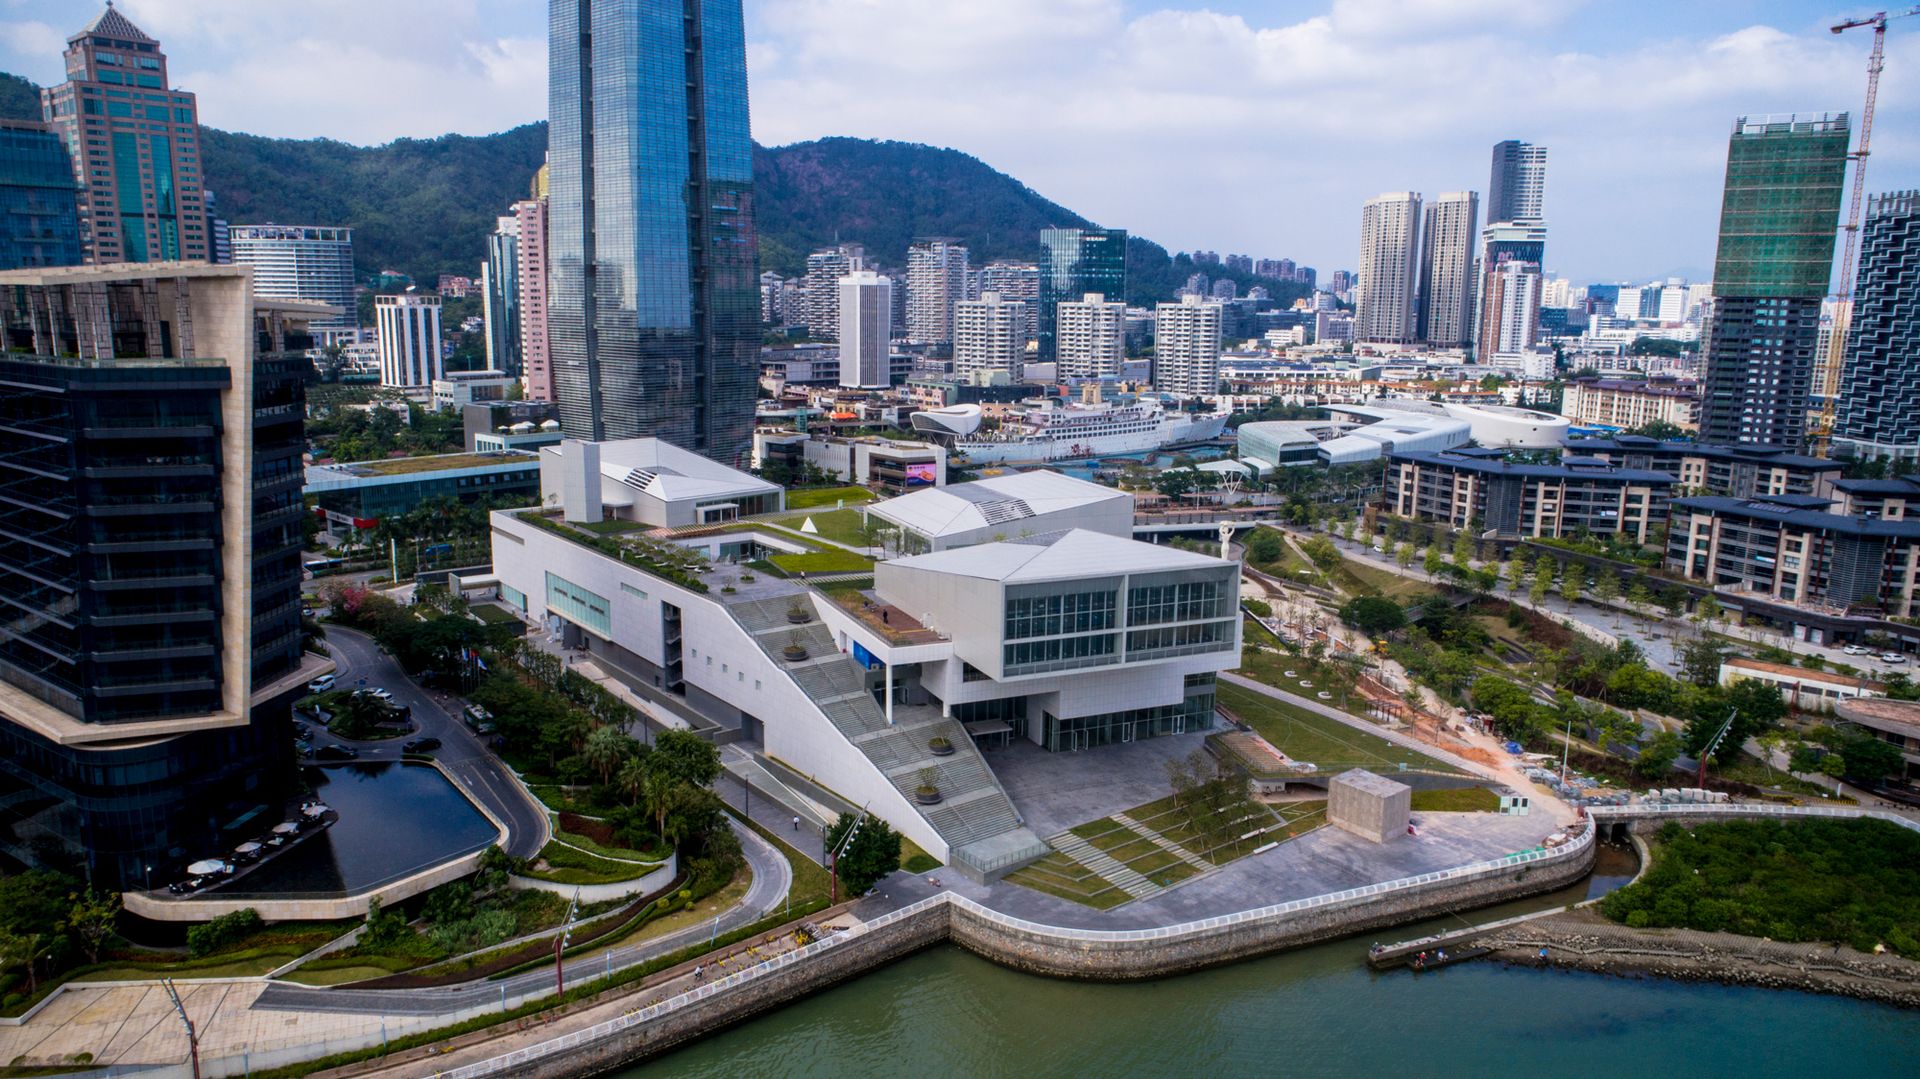 Design Society, designed by the Japanese architect Fumihiko Maki, is the centrepiece of the 71,000 sq. m Sea World Culture and Arts Center in Shekou, Shenzhen Design Society